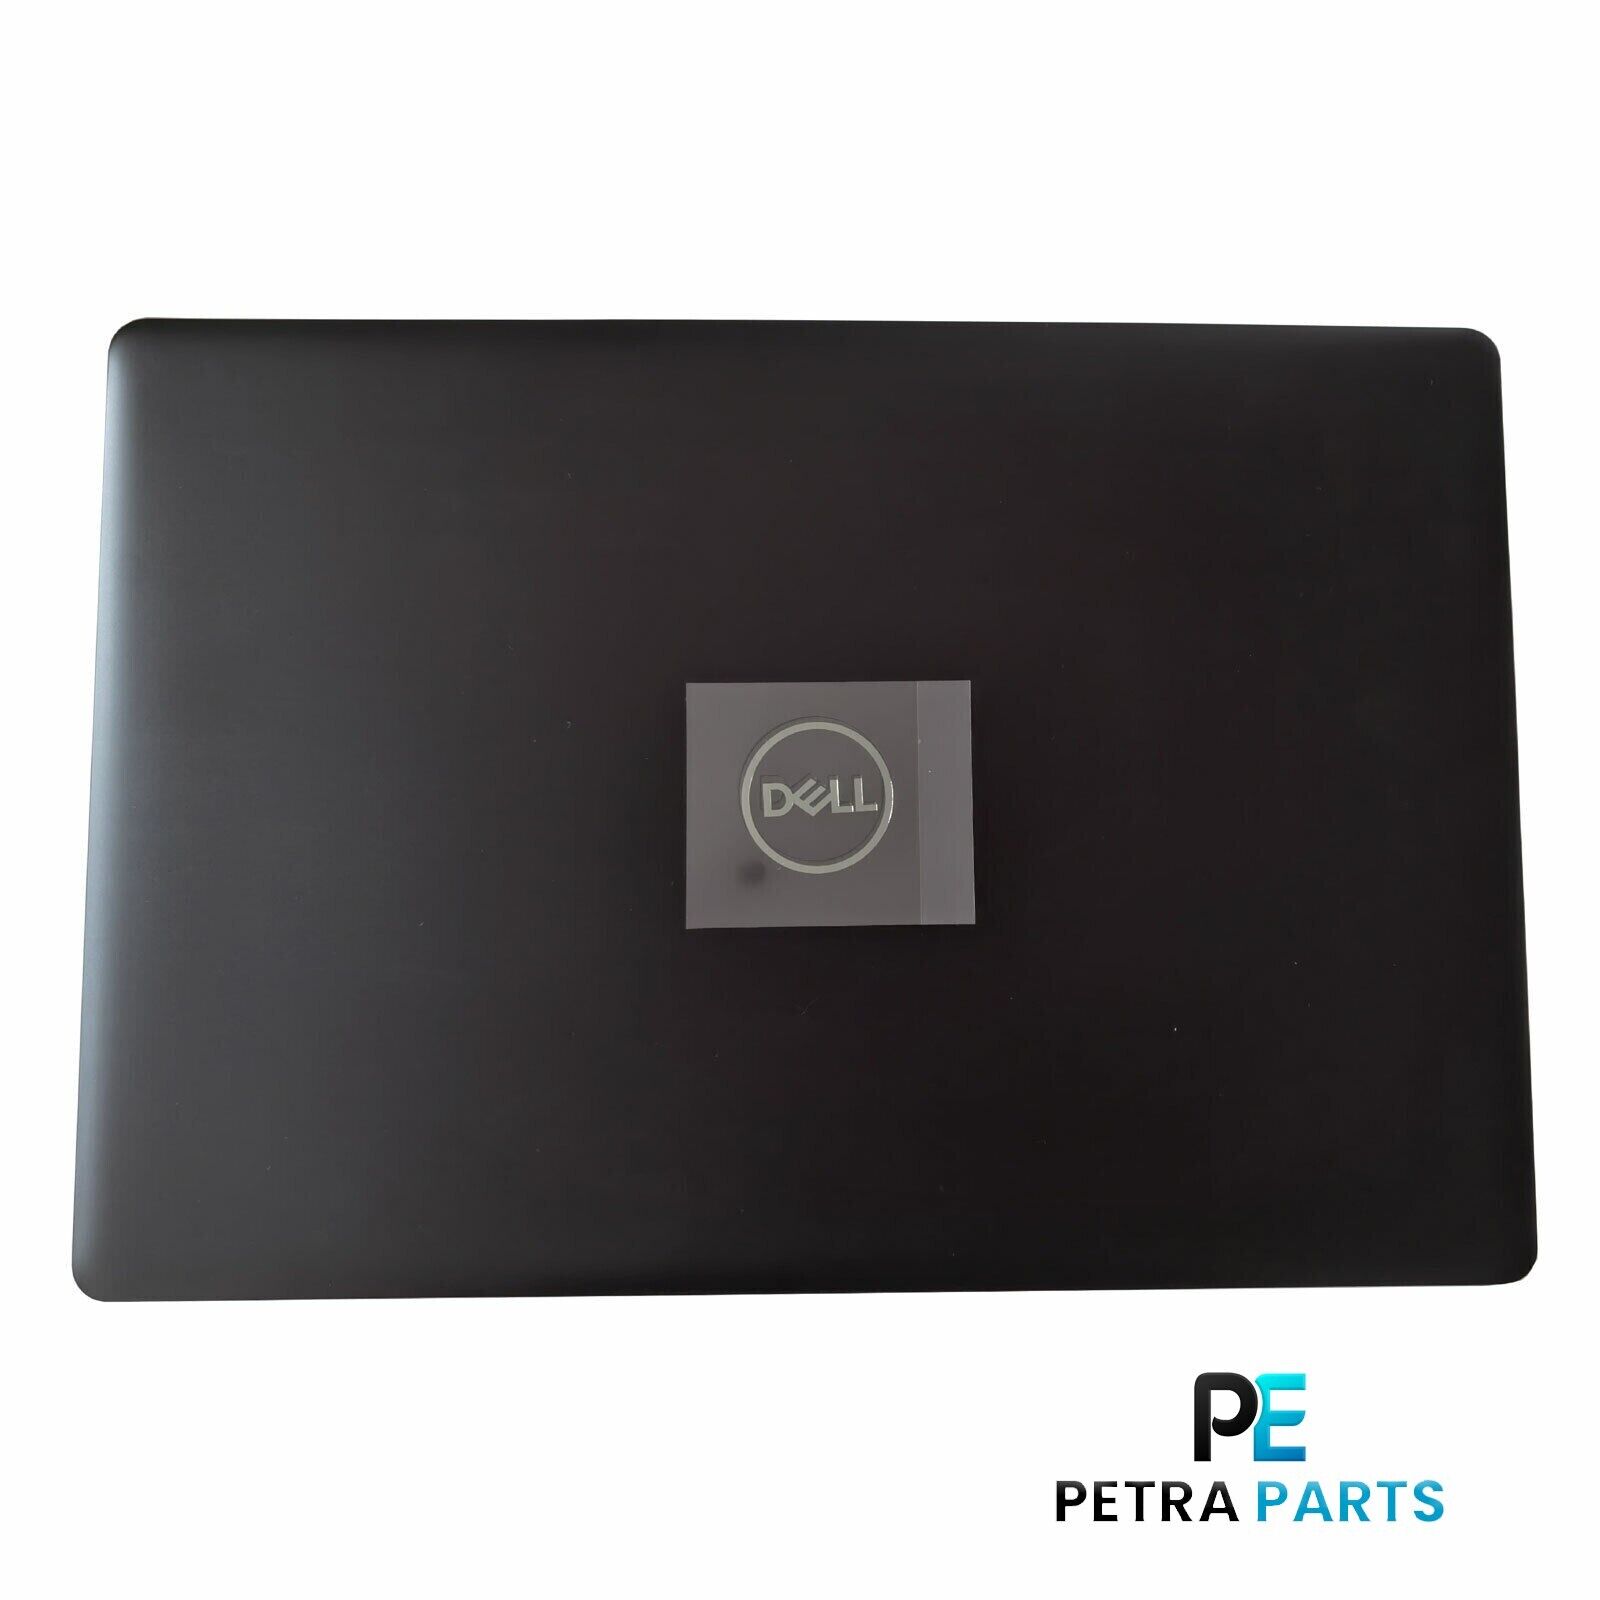 Laptop LCD Top Cover for DELL Inspiron 15 5570 P75F 0KHTN6 KHTN6 Back Cover